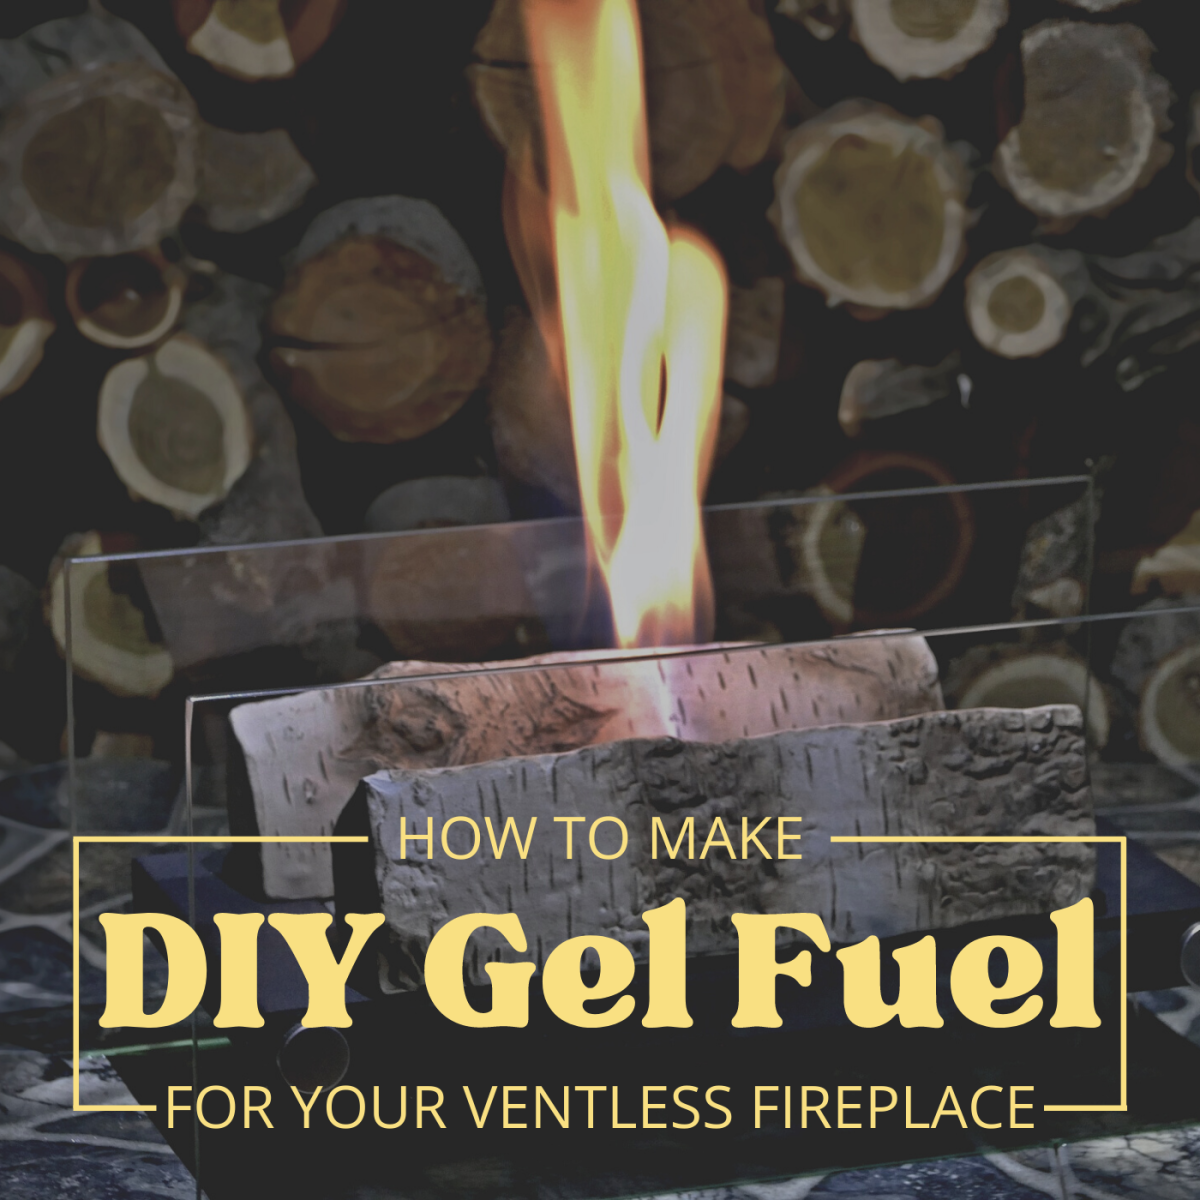 Making your own gel fuel is actually easier than you might think. All you need to do is follow a few simple steps. This guide will show you how.